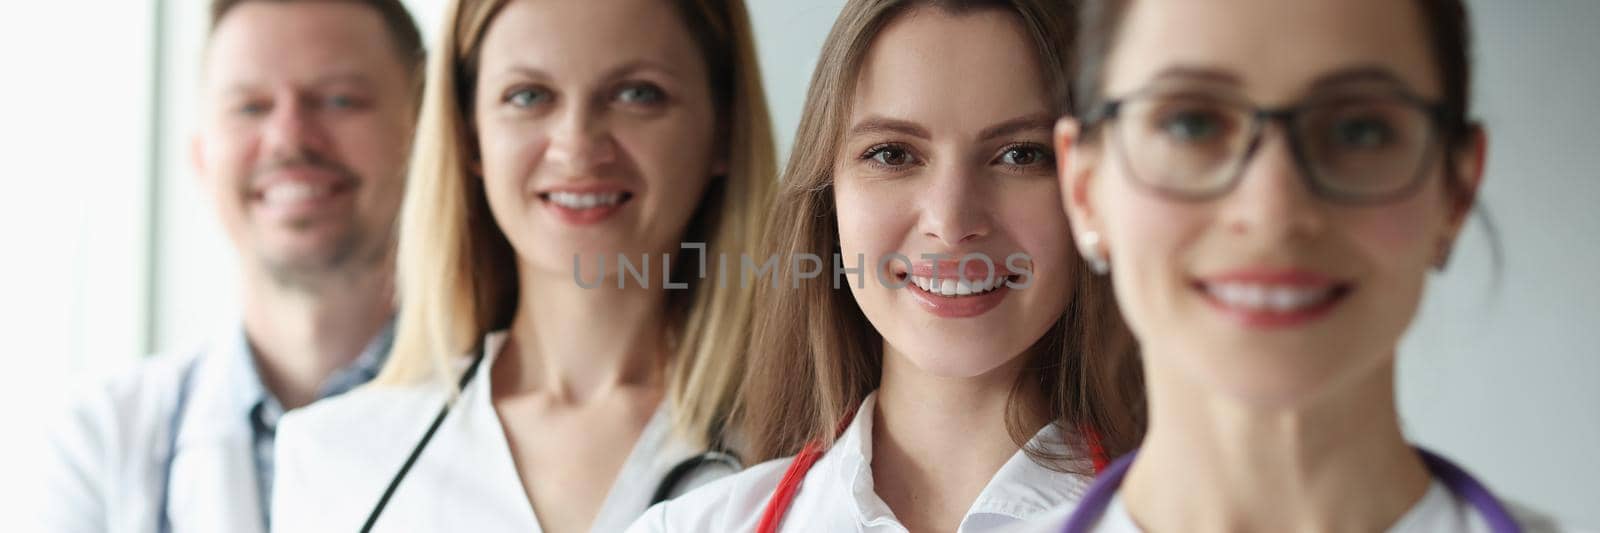 Group of joyful practicing young doctors in uniform, close-up. Hospital first aid, medical professional